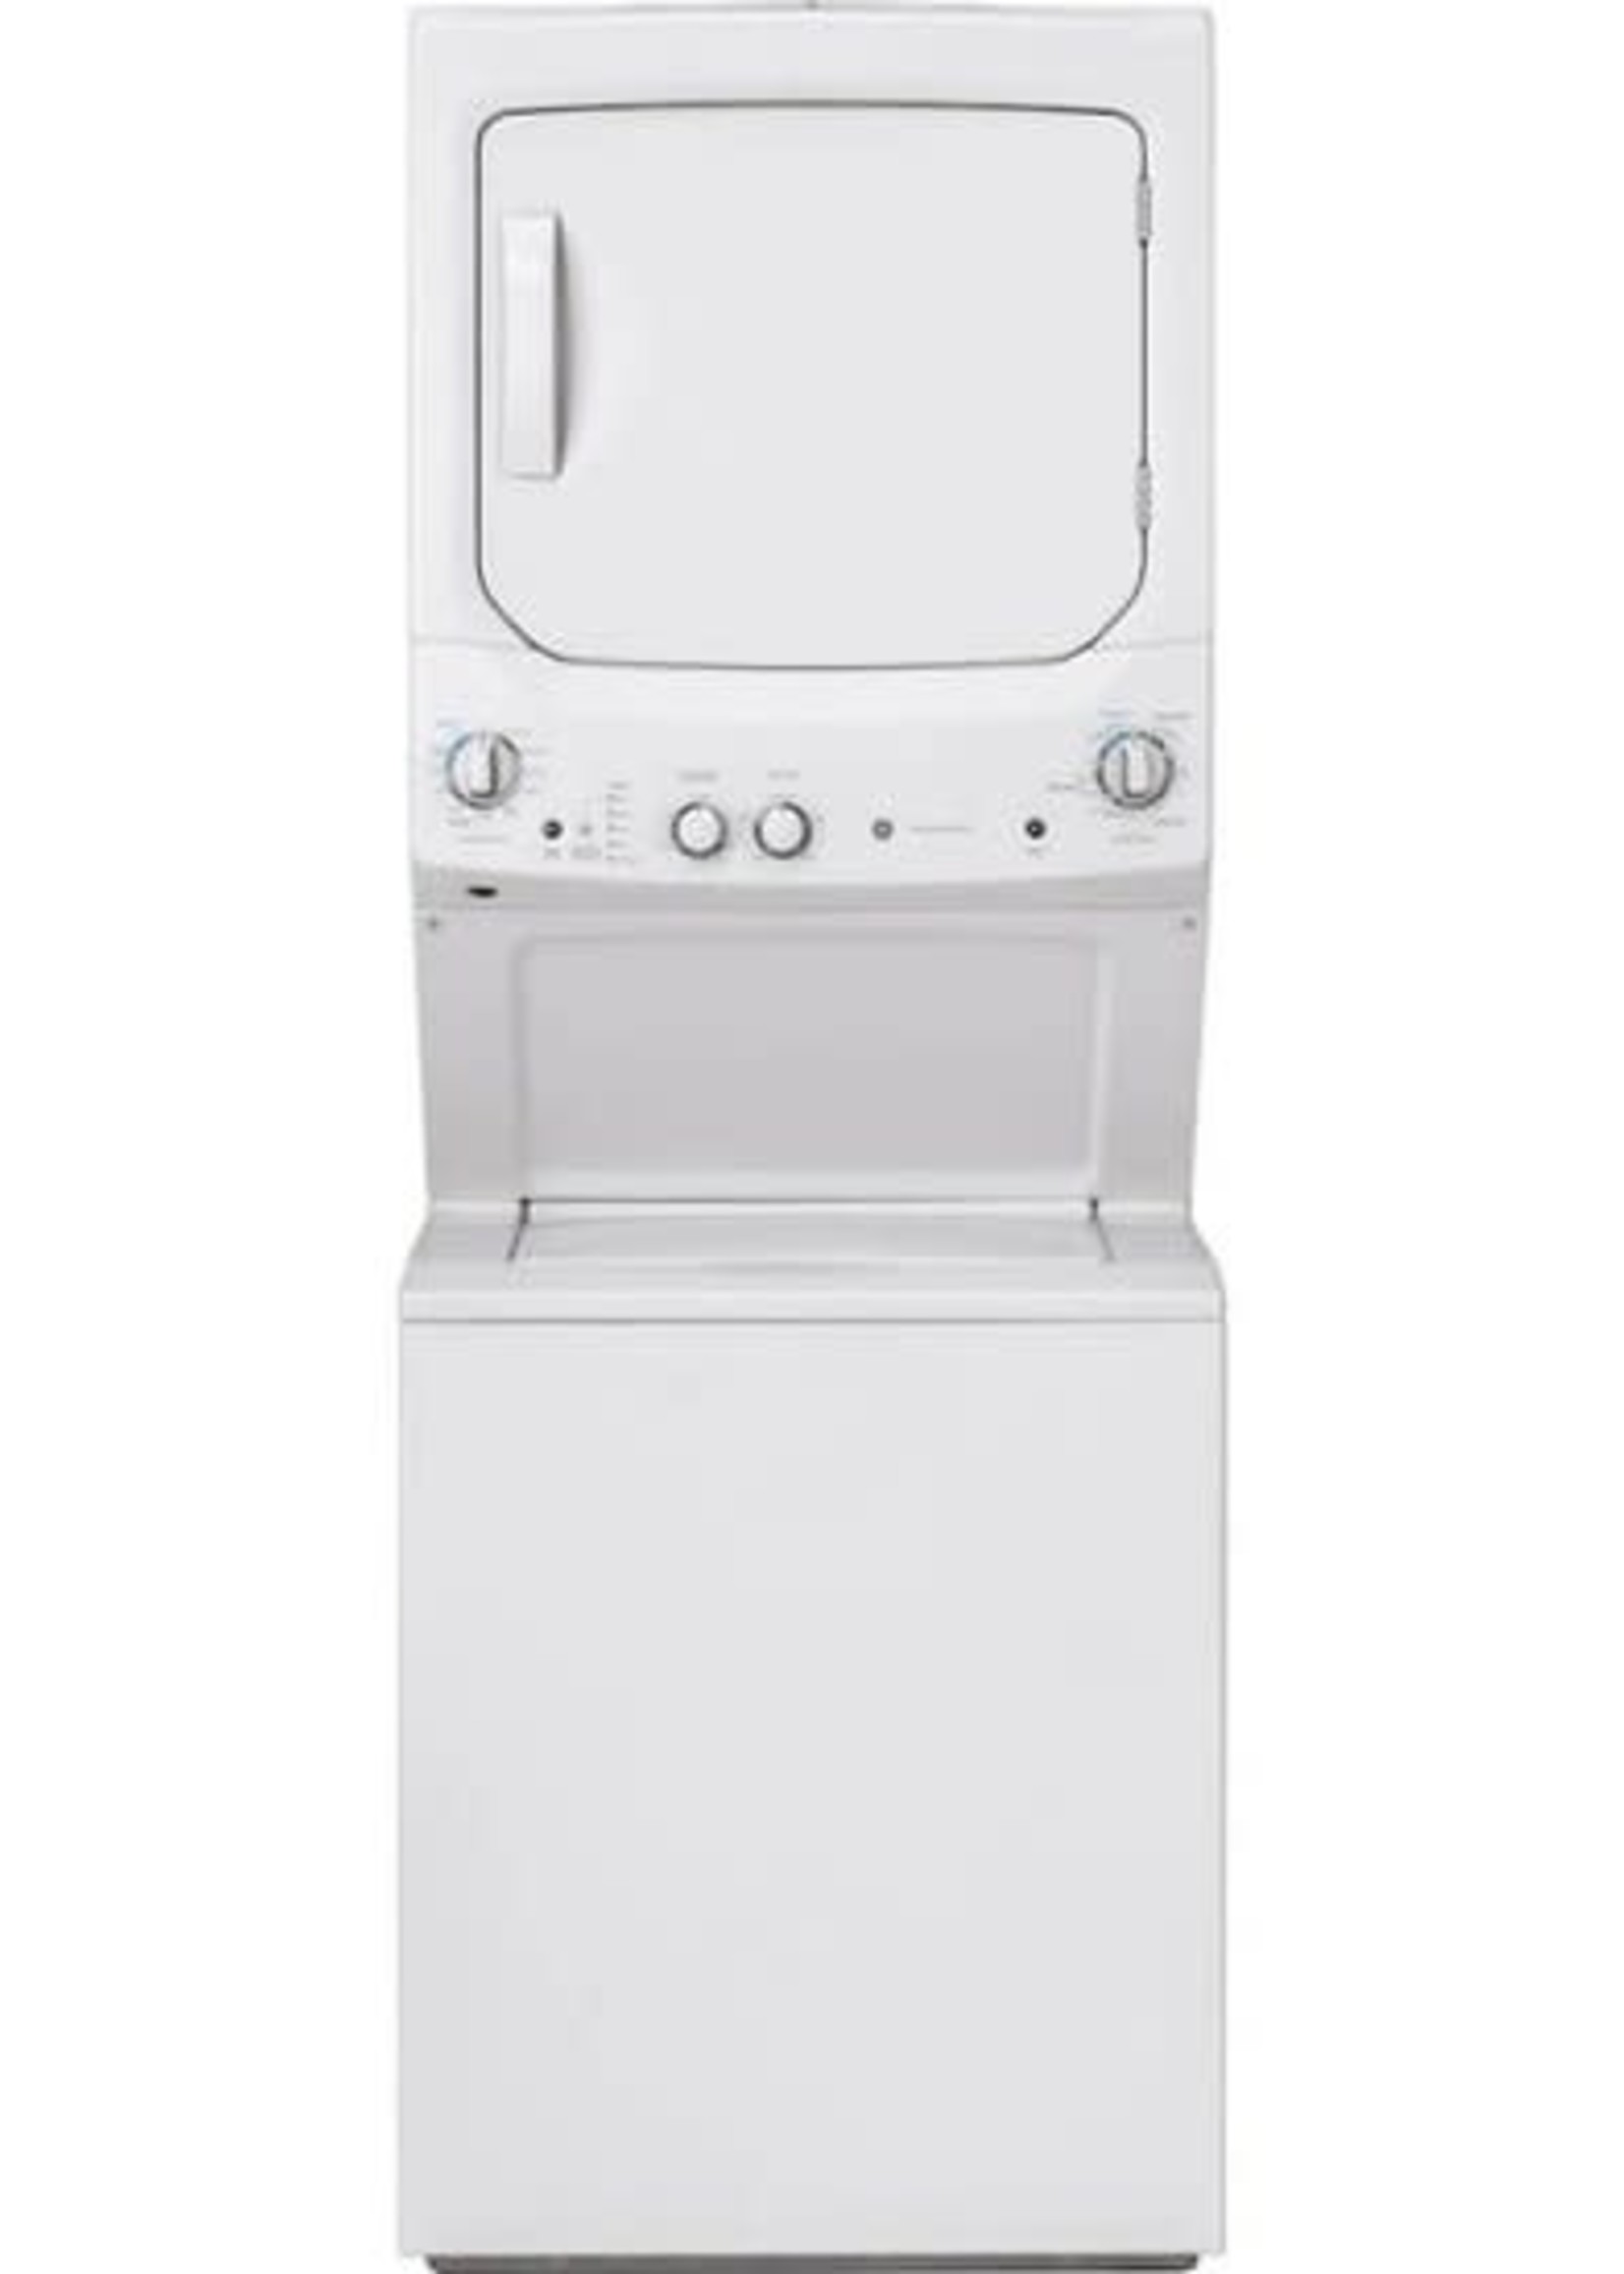 GE *GE GUD27ESSMWW  27 Inch  Stacked Laundry Center with 3.8-cu ft Washer and 5.9-cu ft Dryer